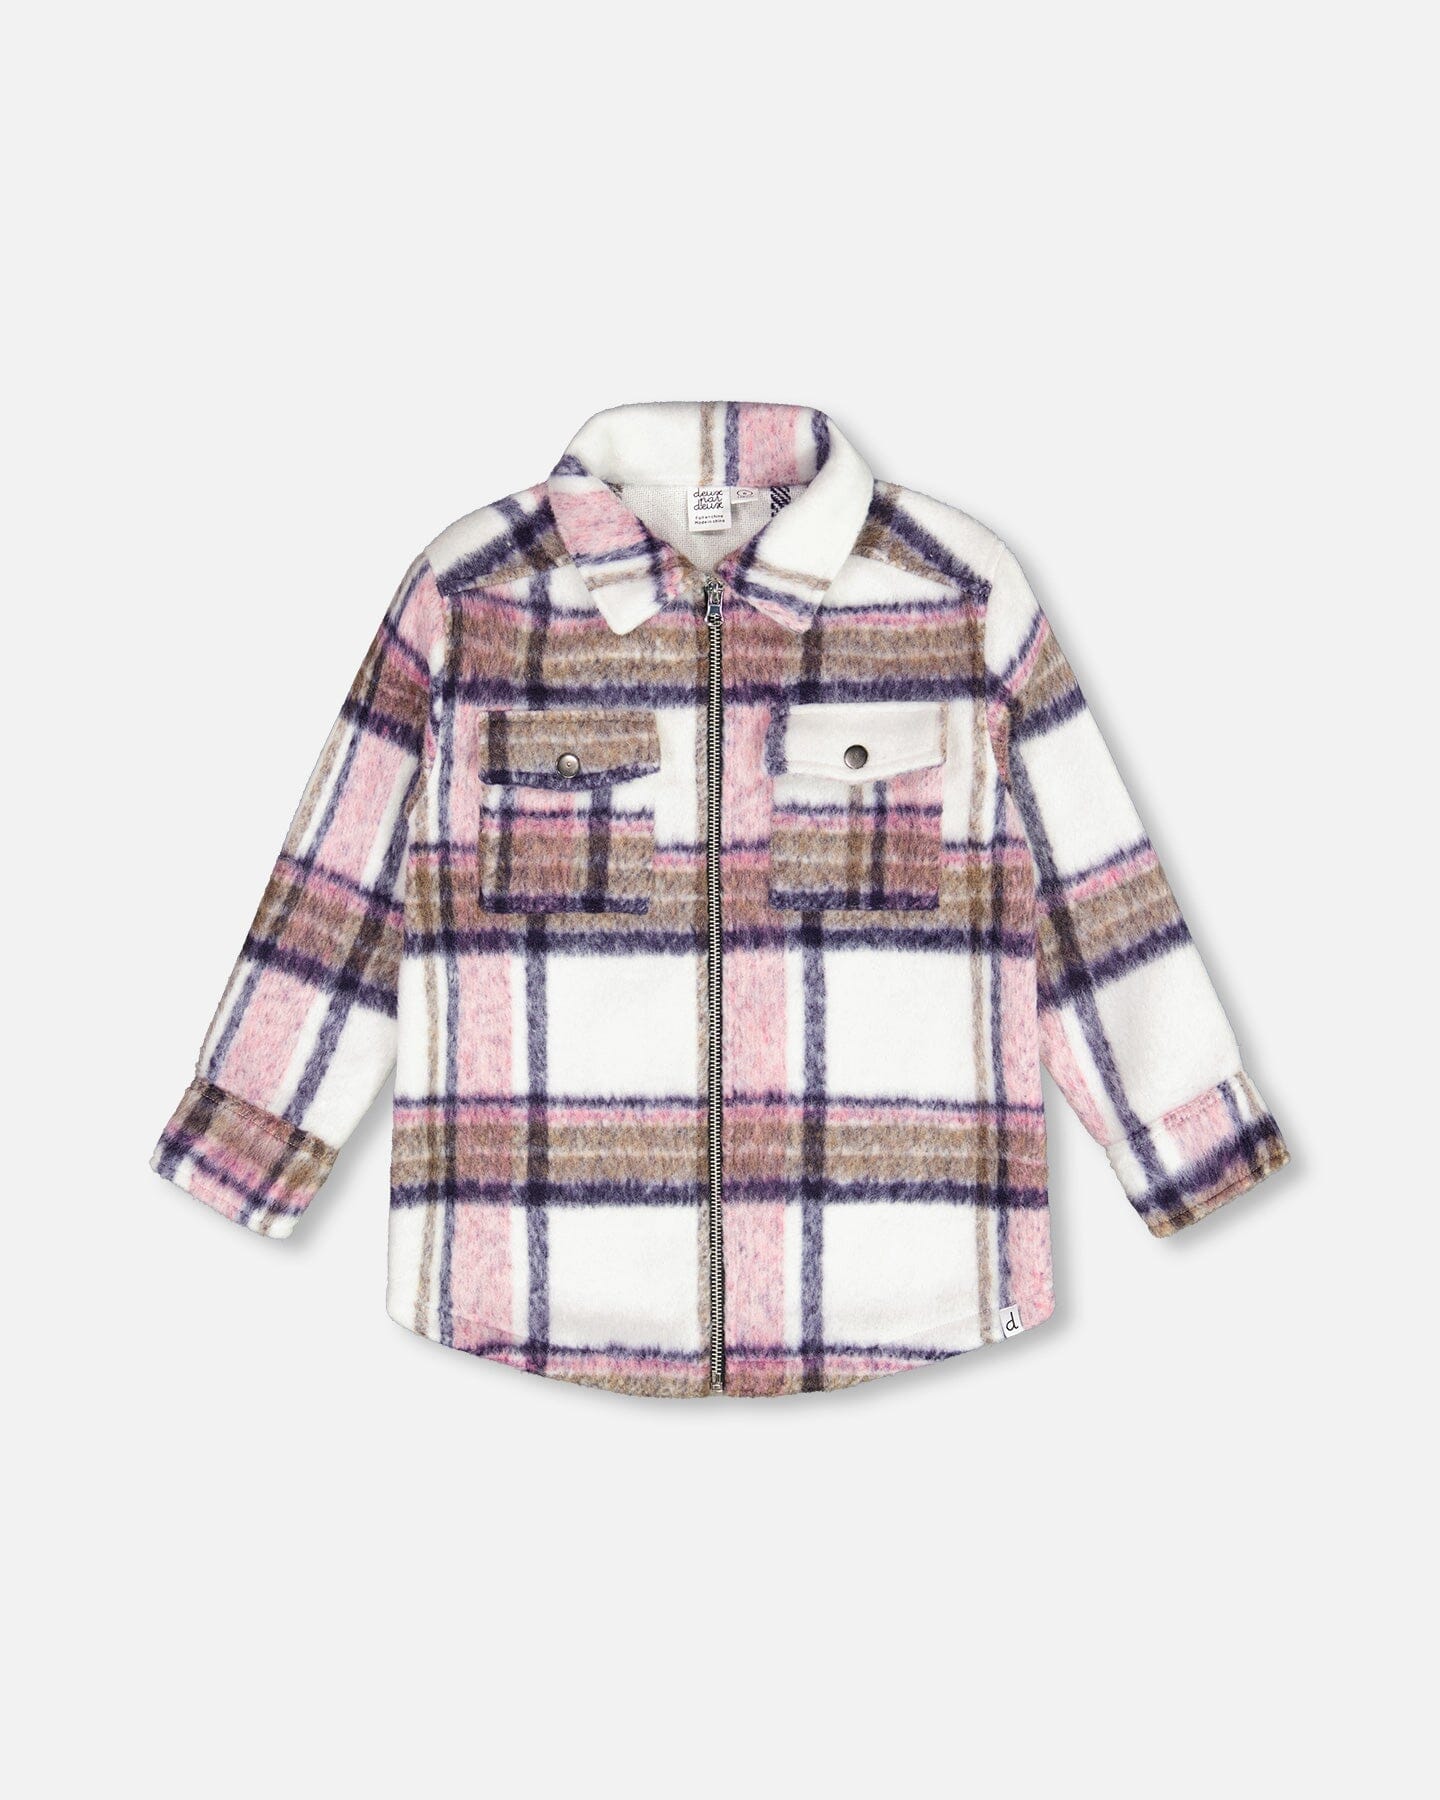 Plaid Overshirt Off White, Pink And Purple - F20Y10_074